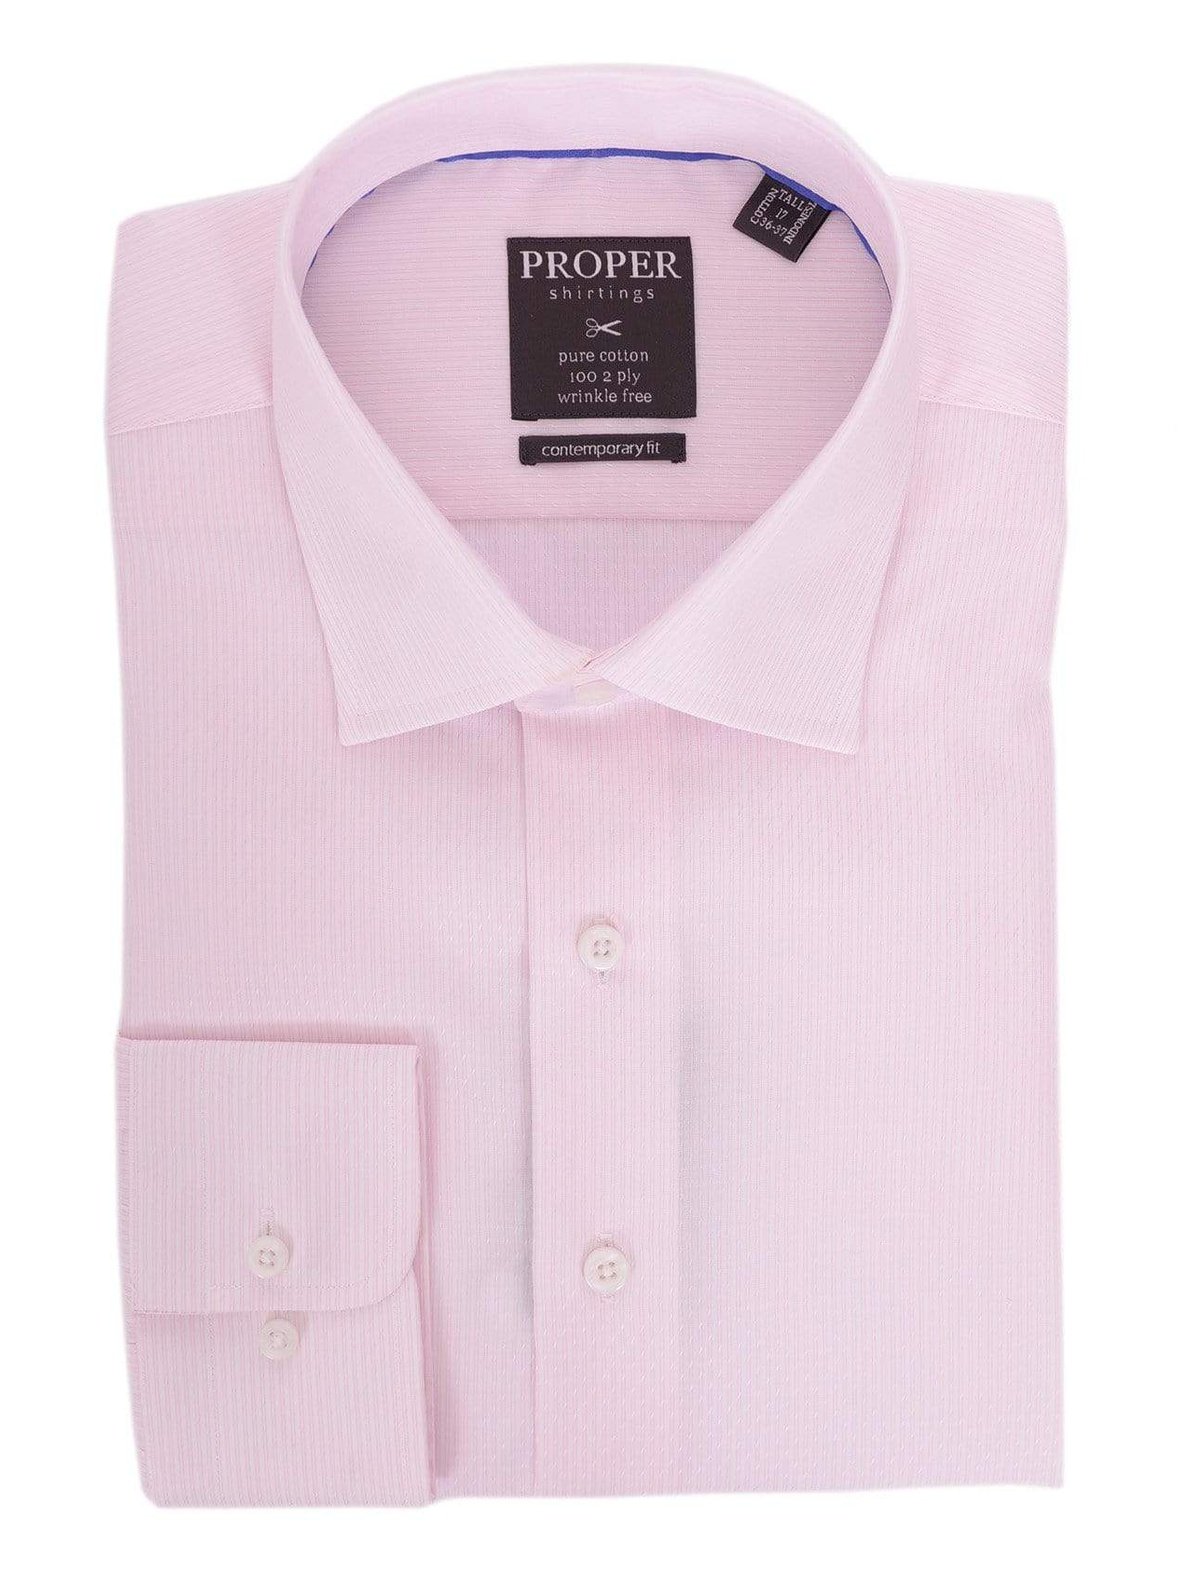 Proper Shirtings SHIRTS 17 36/37 Slim Fit Pink Striped Spread Collar Wrinkle Free 100 2 Ply Cotton Dress Shirt